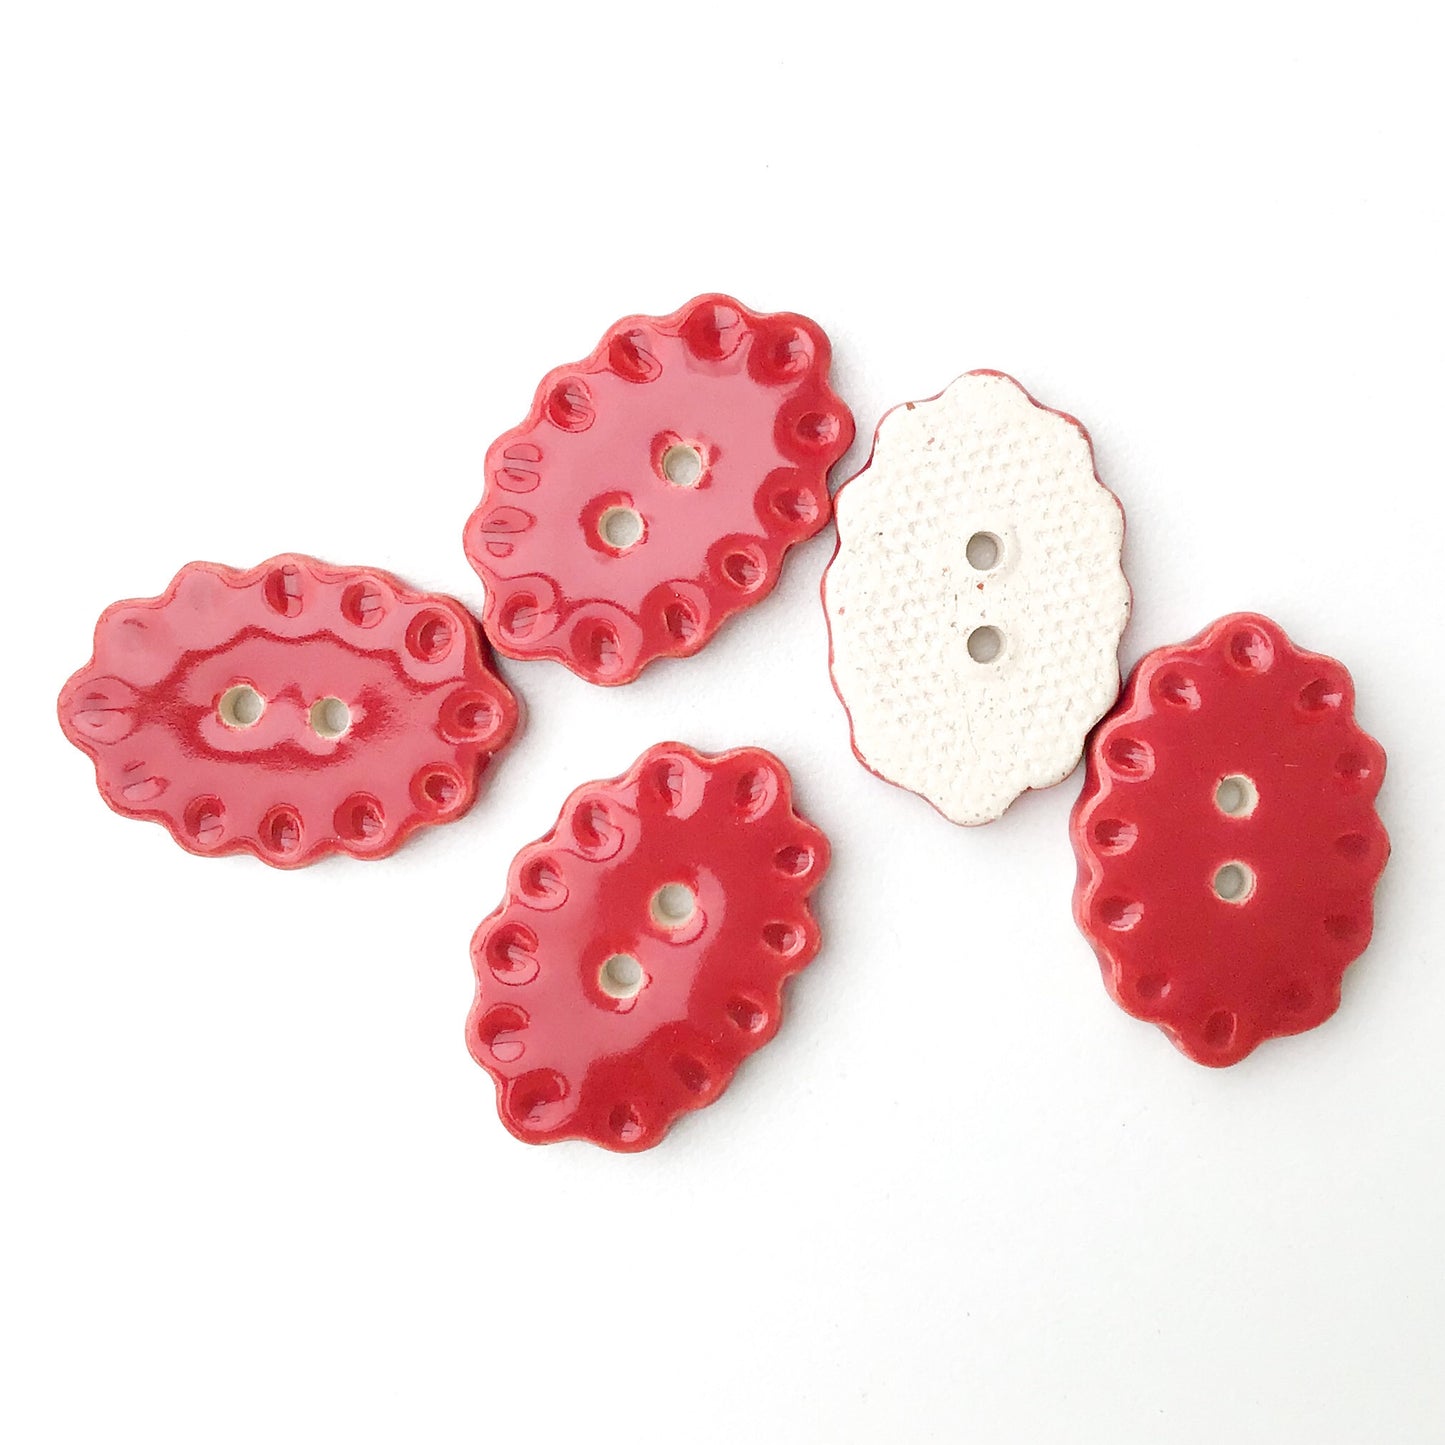 Scalloped Red Ceramic Buttons  3/4" x 1-1/16" - 5 Pack